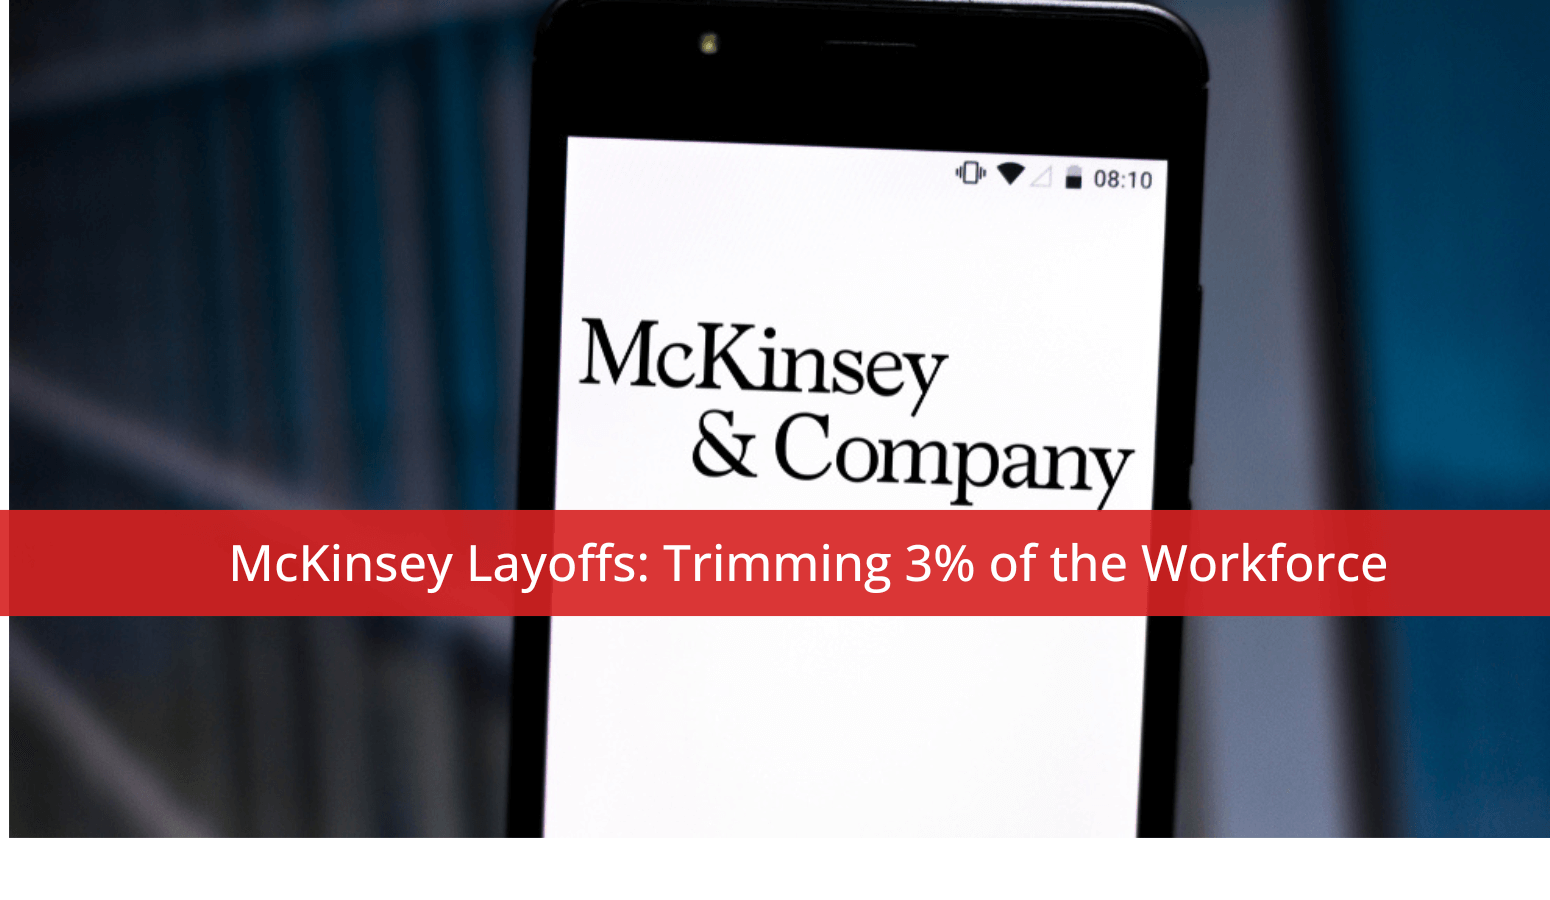 Featured image for “McKinsey Layoffs: Trimming 3% of the Workforce”